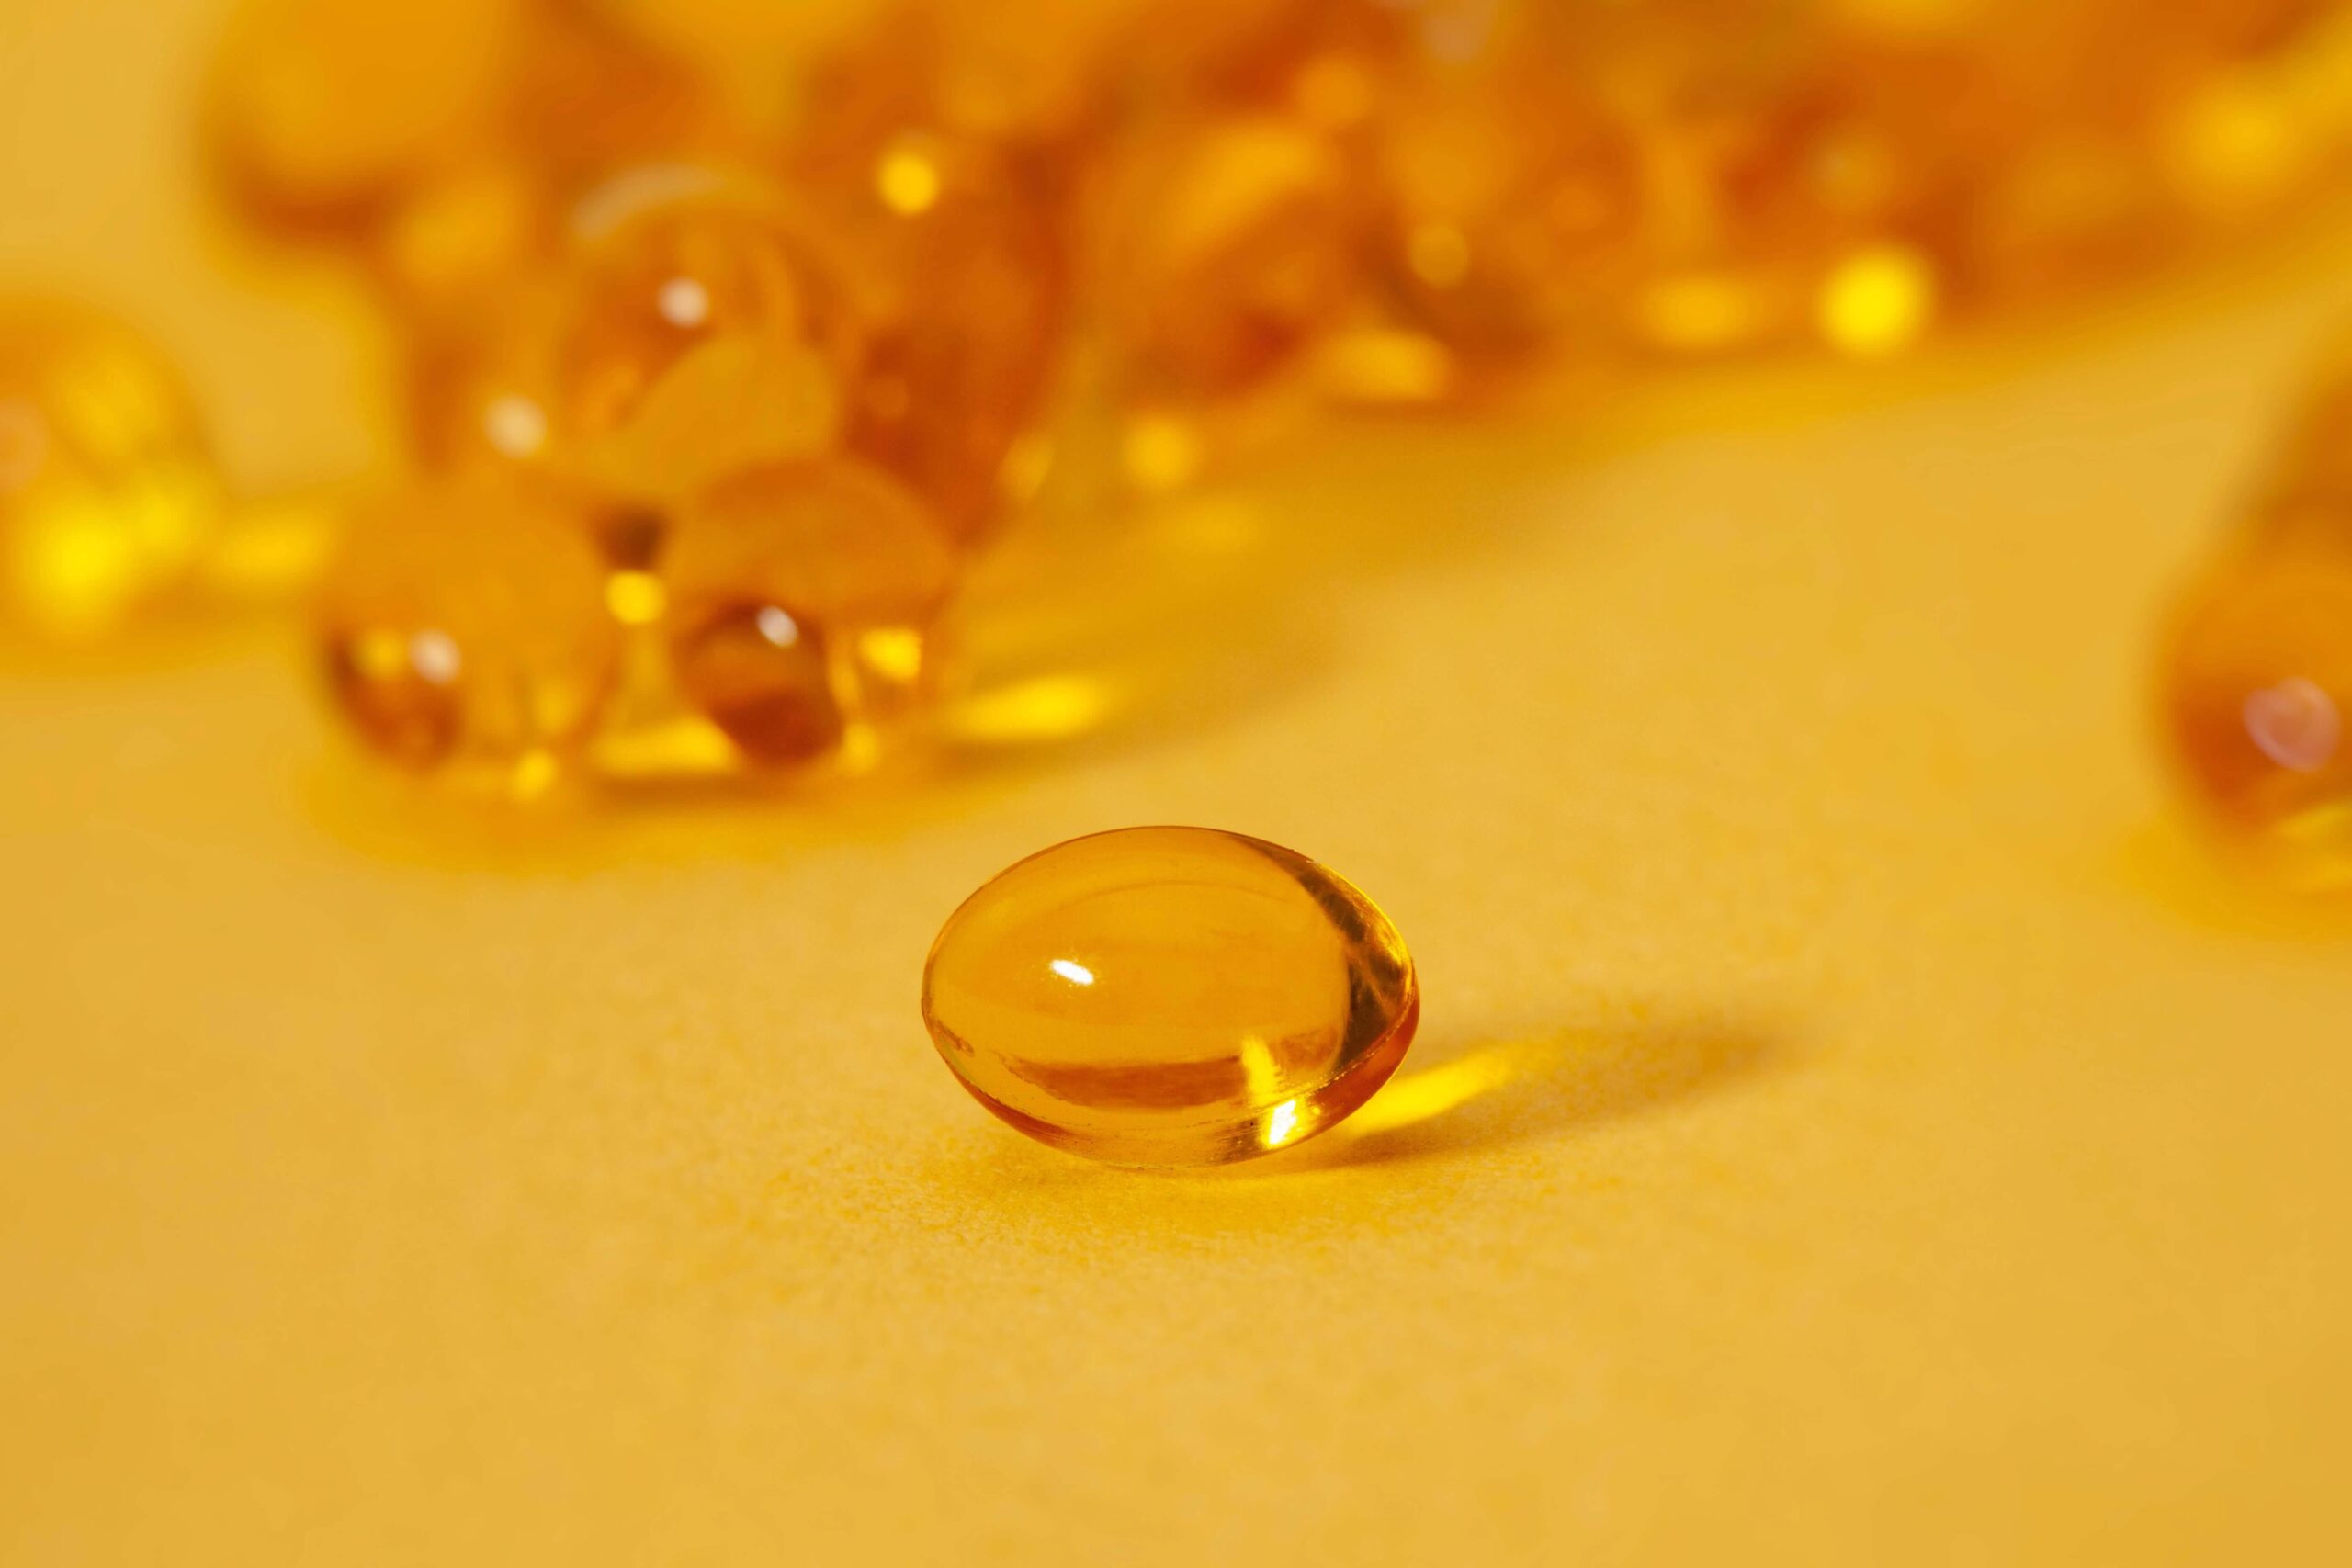 How To Make Sure That The Ingredients of CBD Capsules Are Pure?